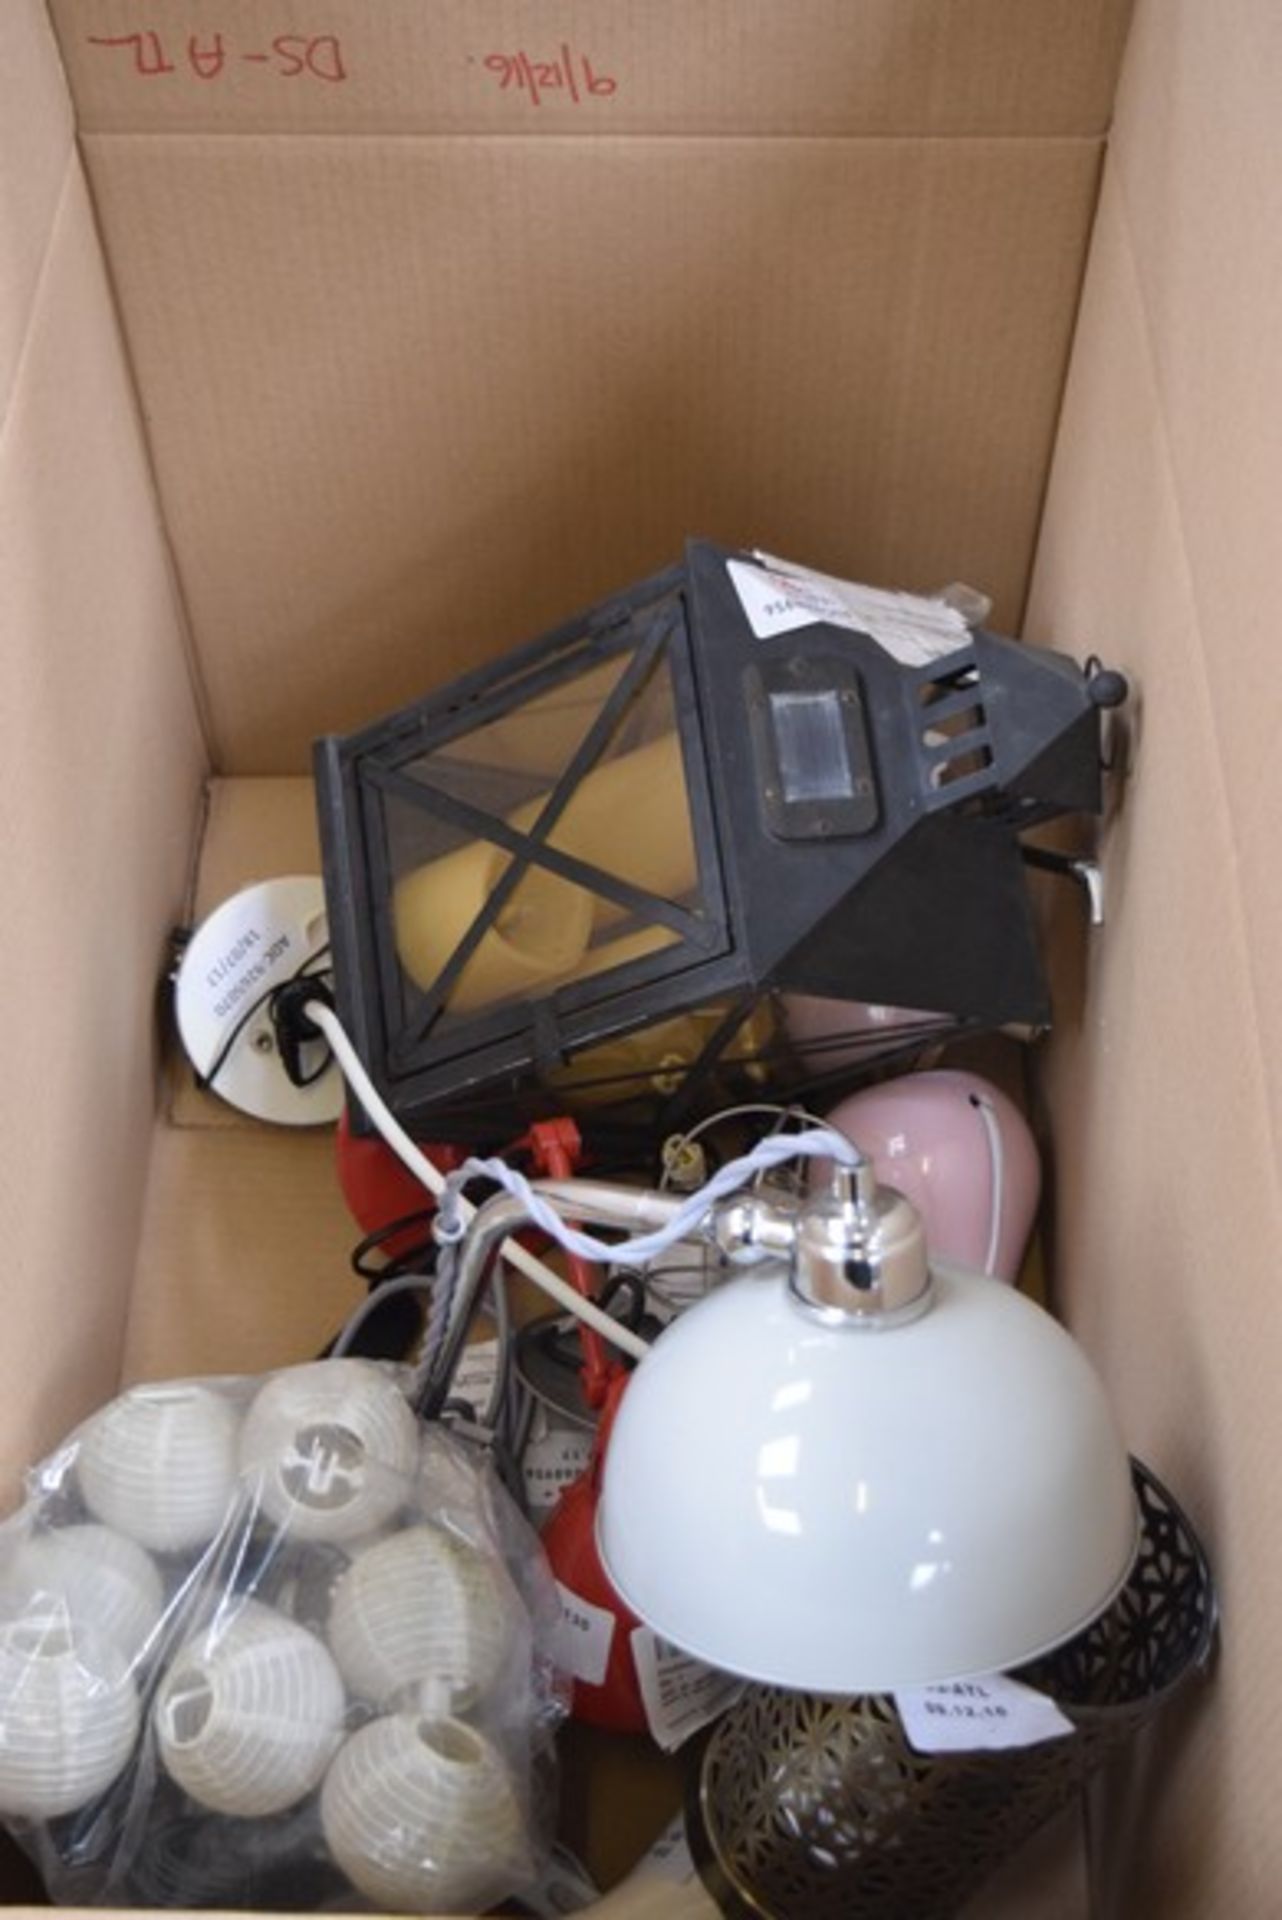 15 x ASSORTED TABLE LAMPS, TASK LAMPS AND LANTERNS IN VARIOUS SIZES AND STYLES RRP £5 - £25 EACH